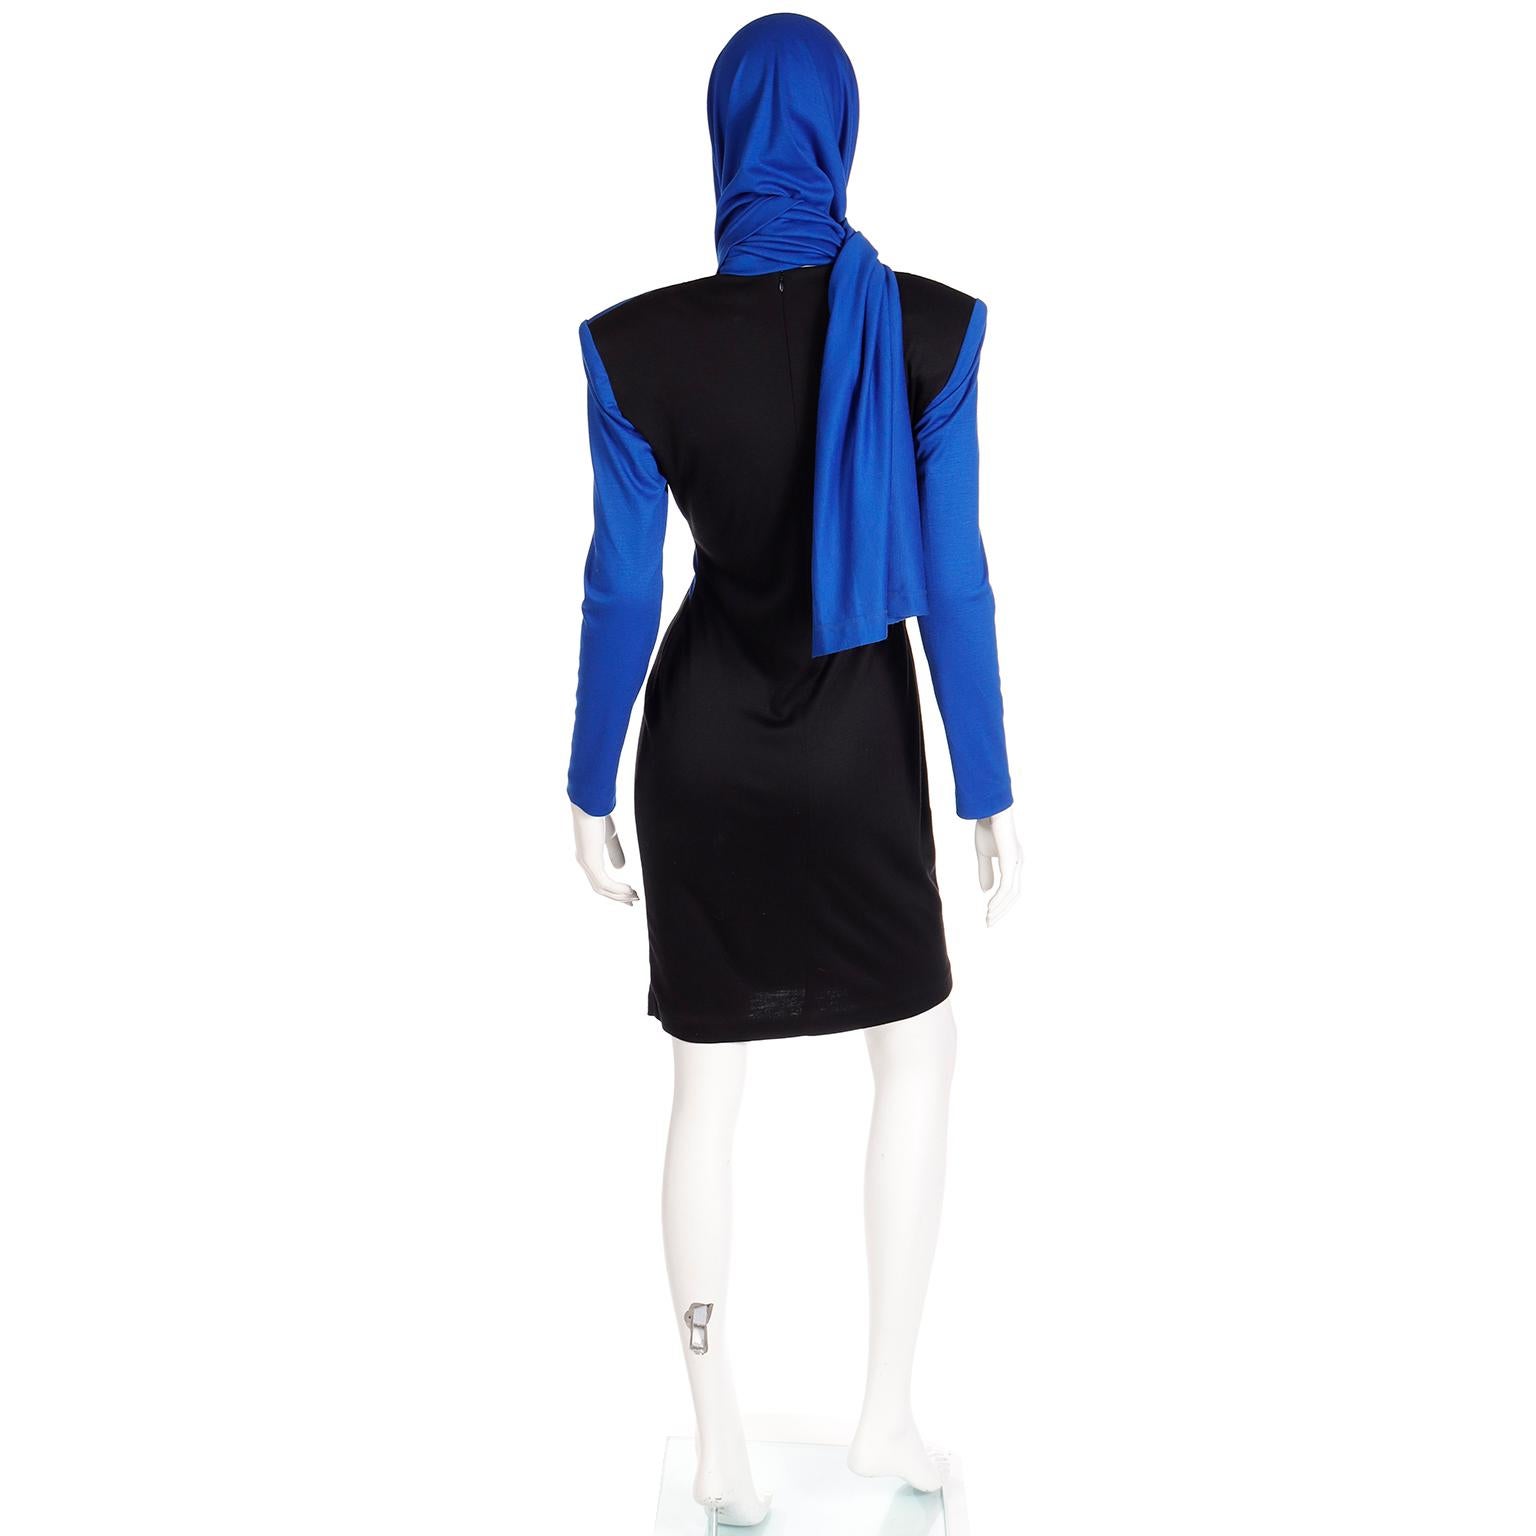 FW 1989 Patrick Kelly Runway Dress in Blue & Black Knit with Head Scarf  For Sale 2